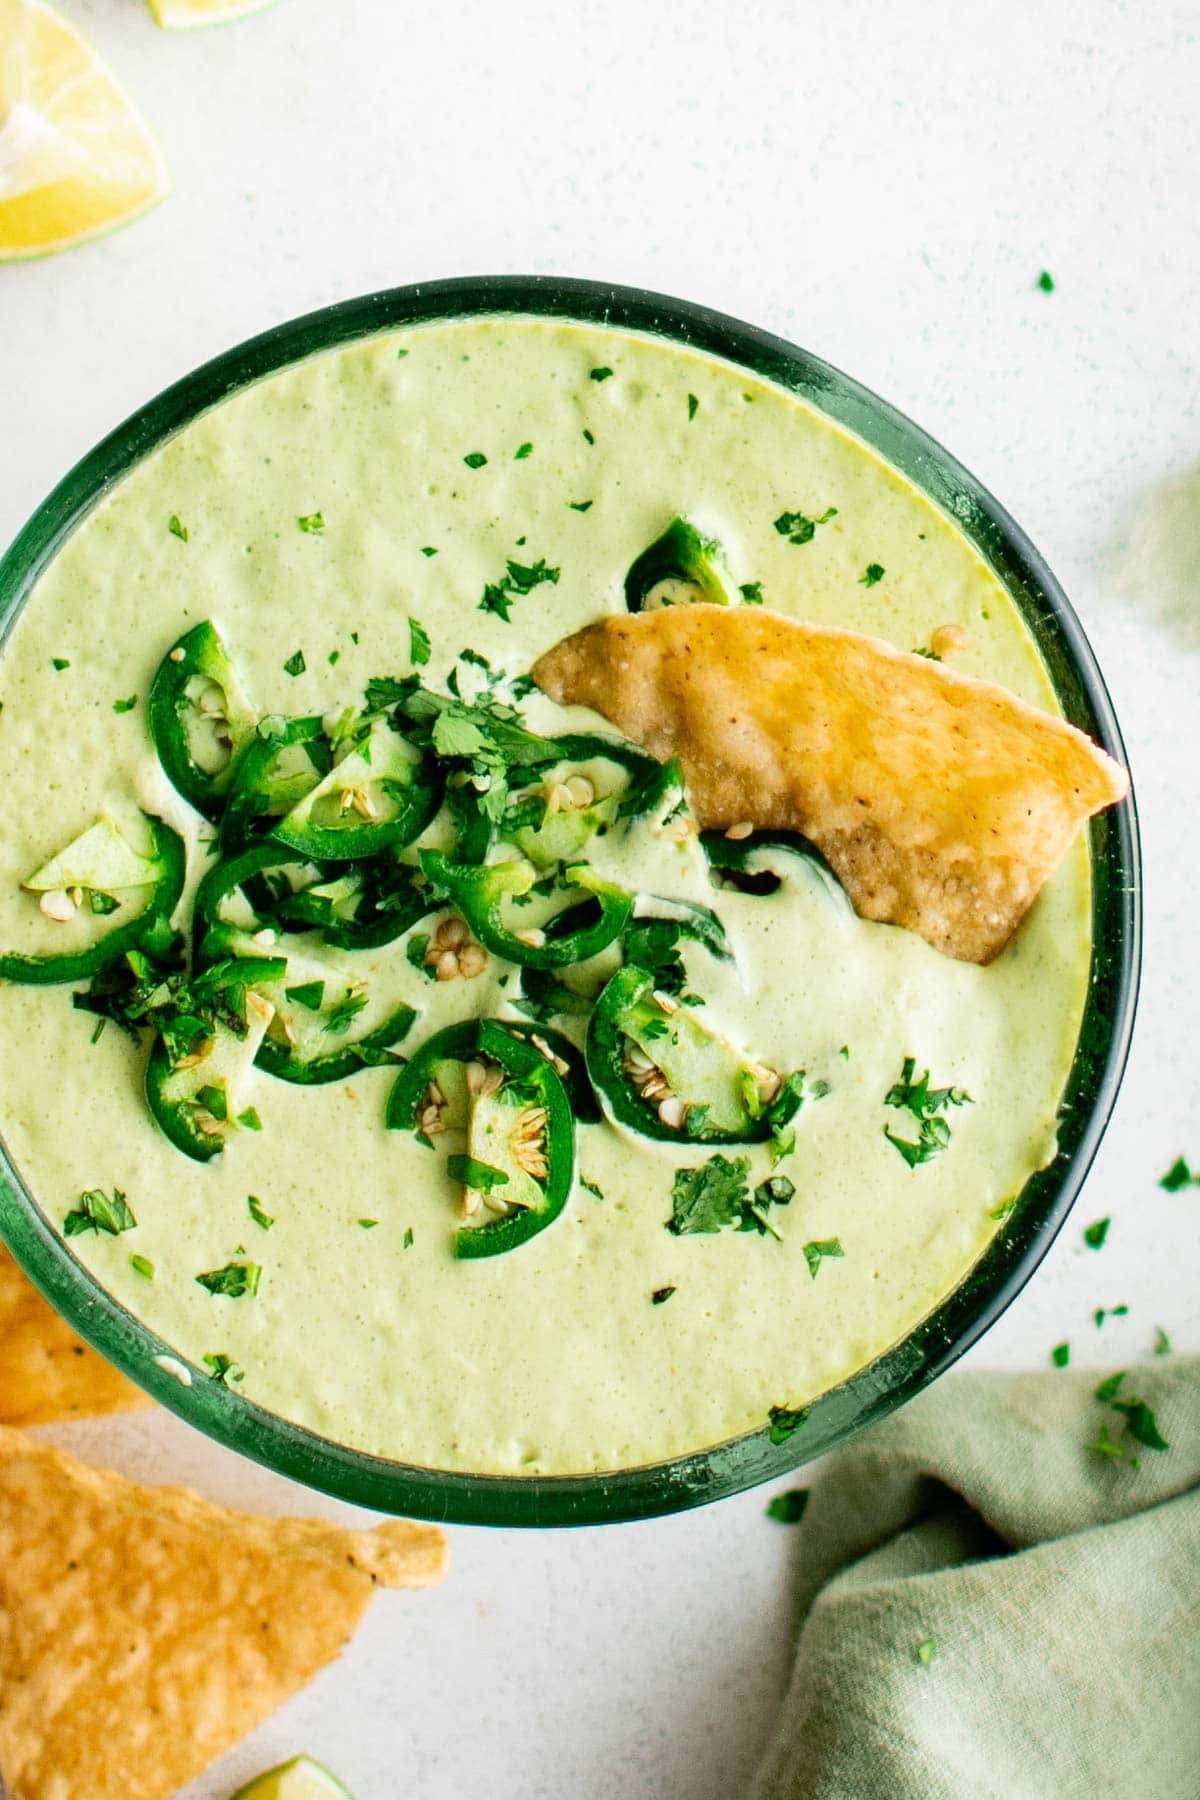 Creamy green dip with sliced jalapenos and a tortilla chip.